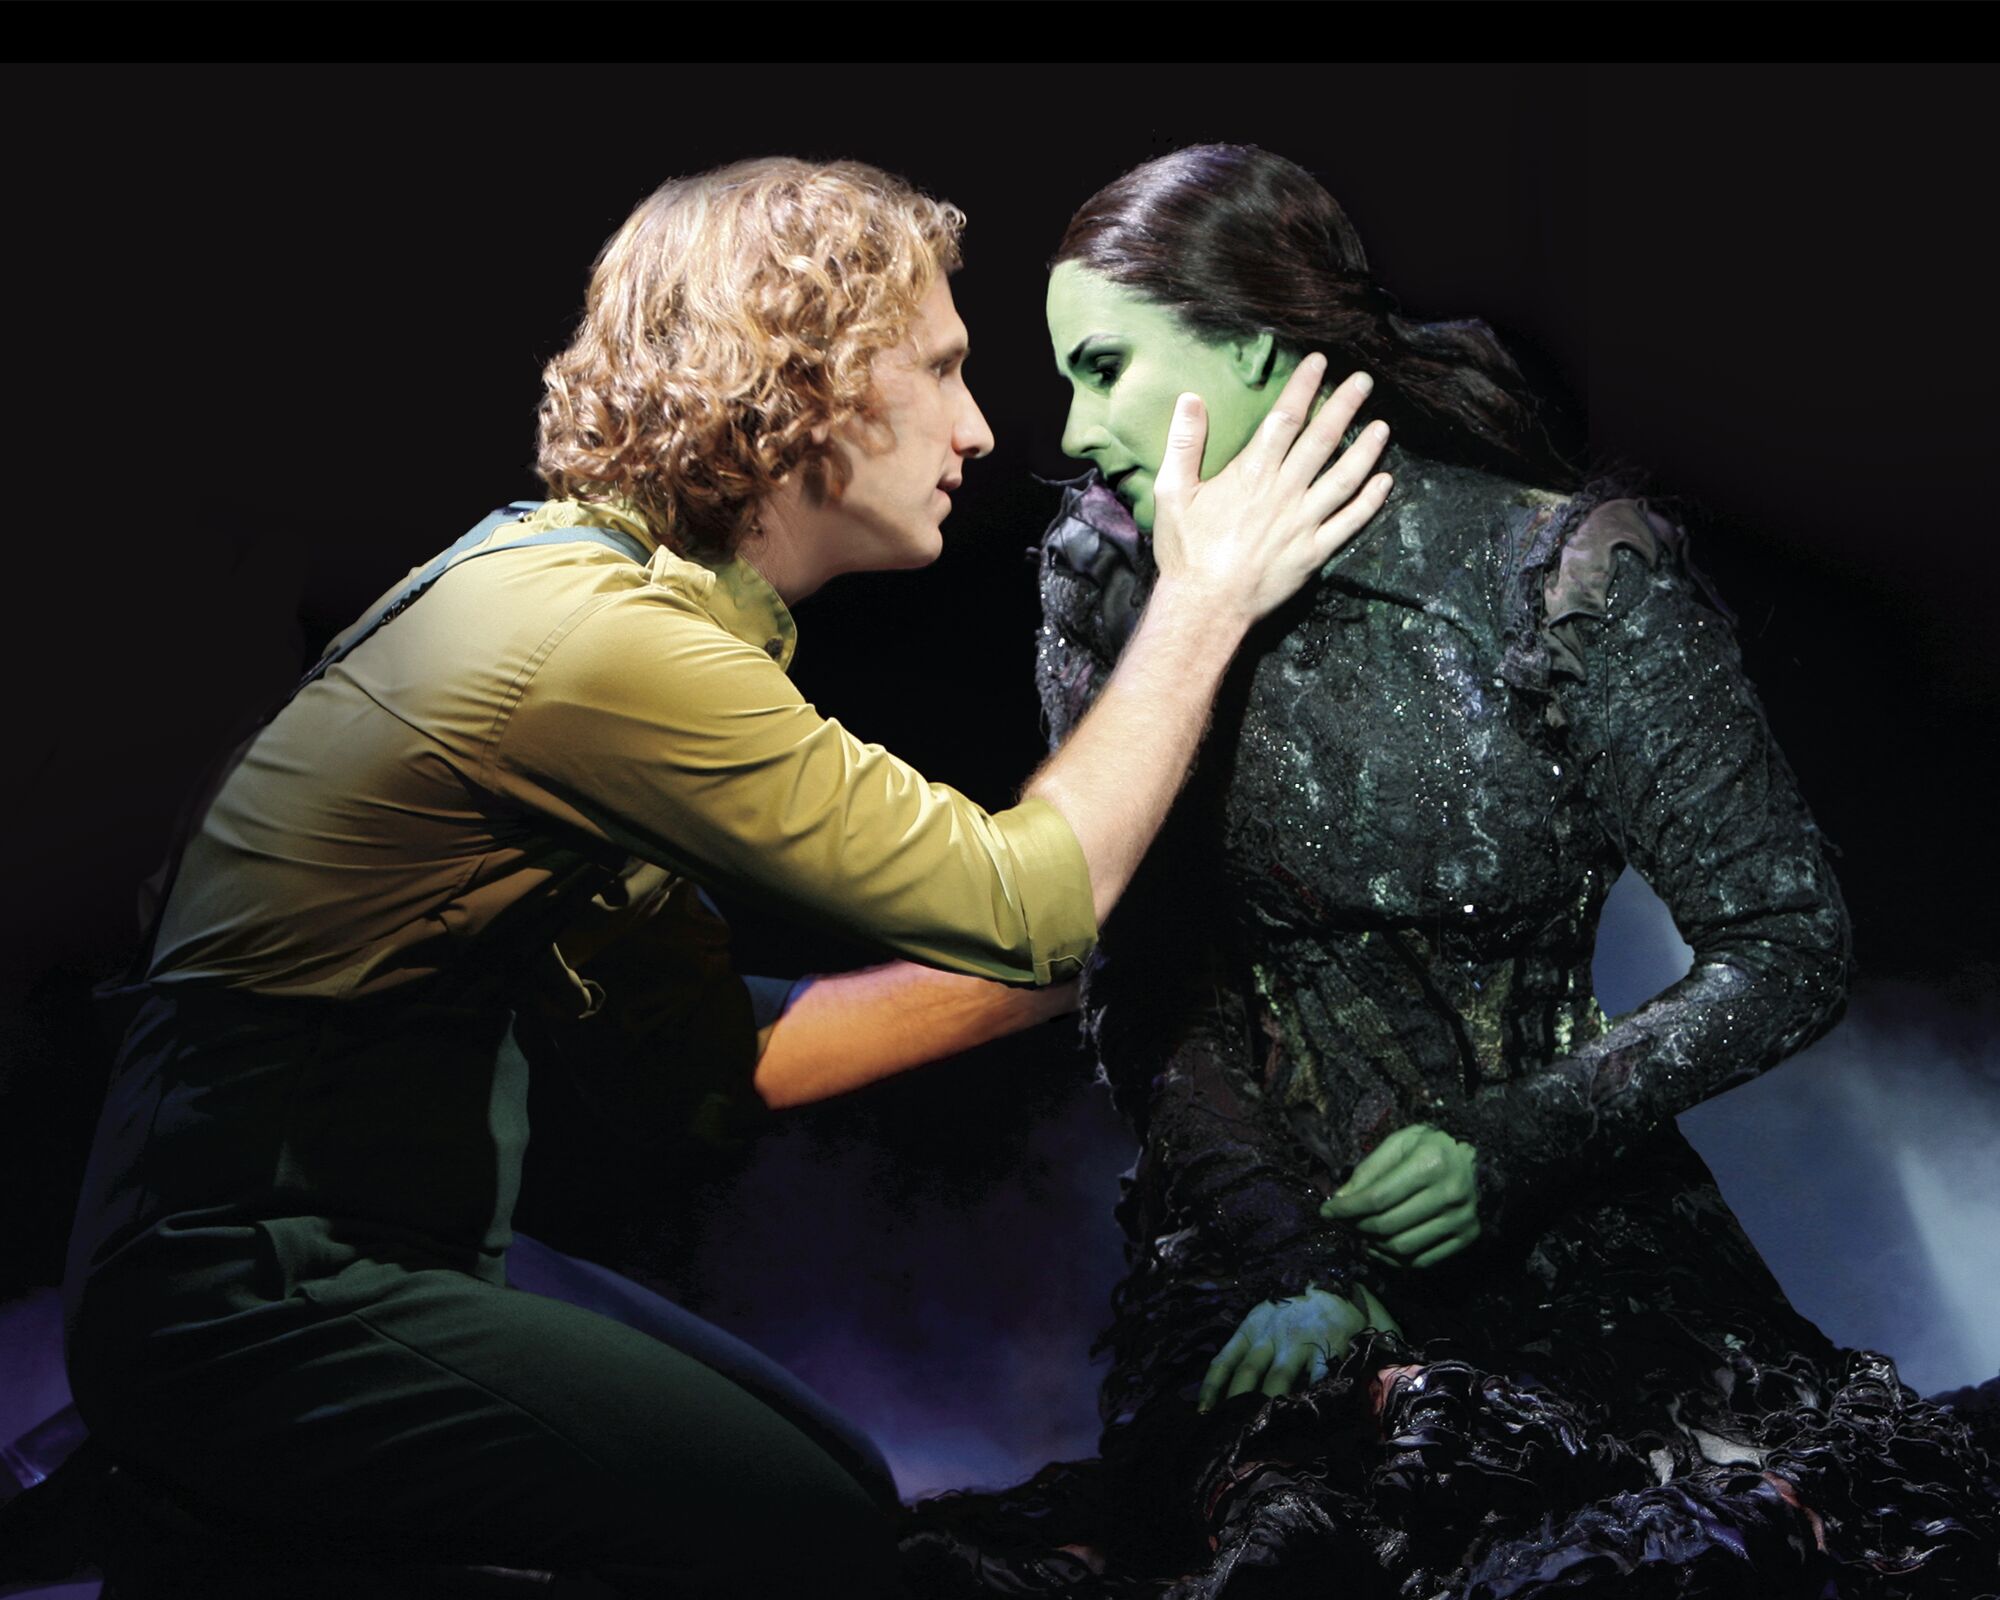 A man kneels next to a woman, putting his hand on her face, which is green